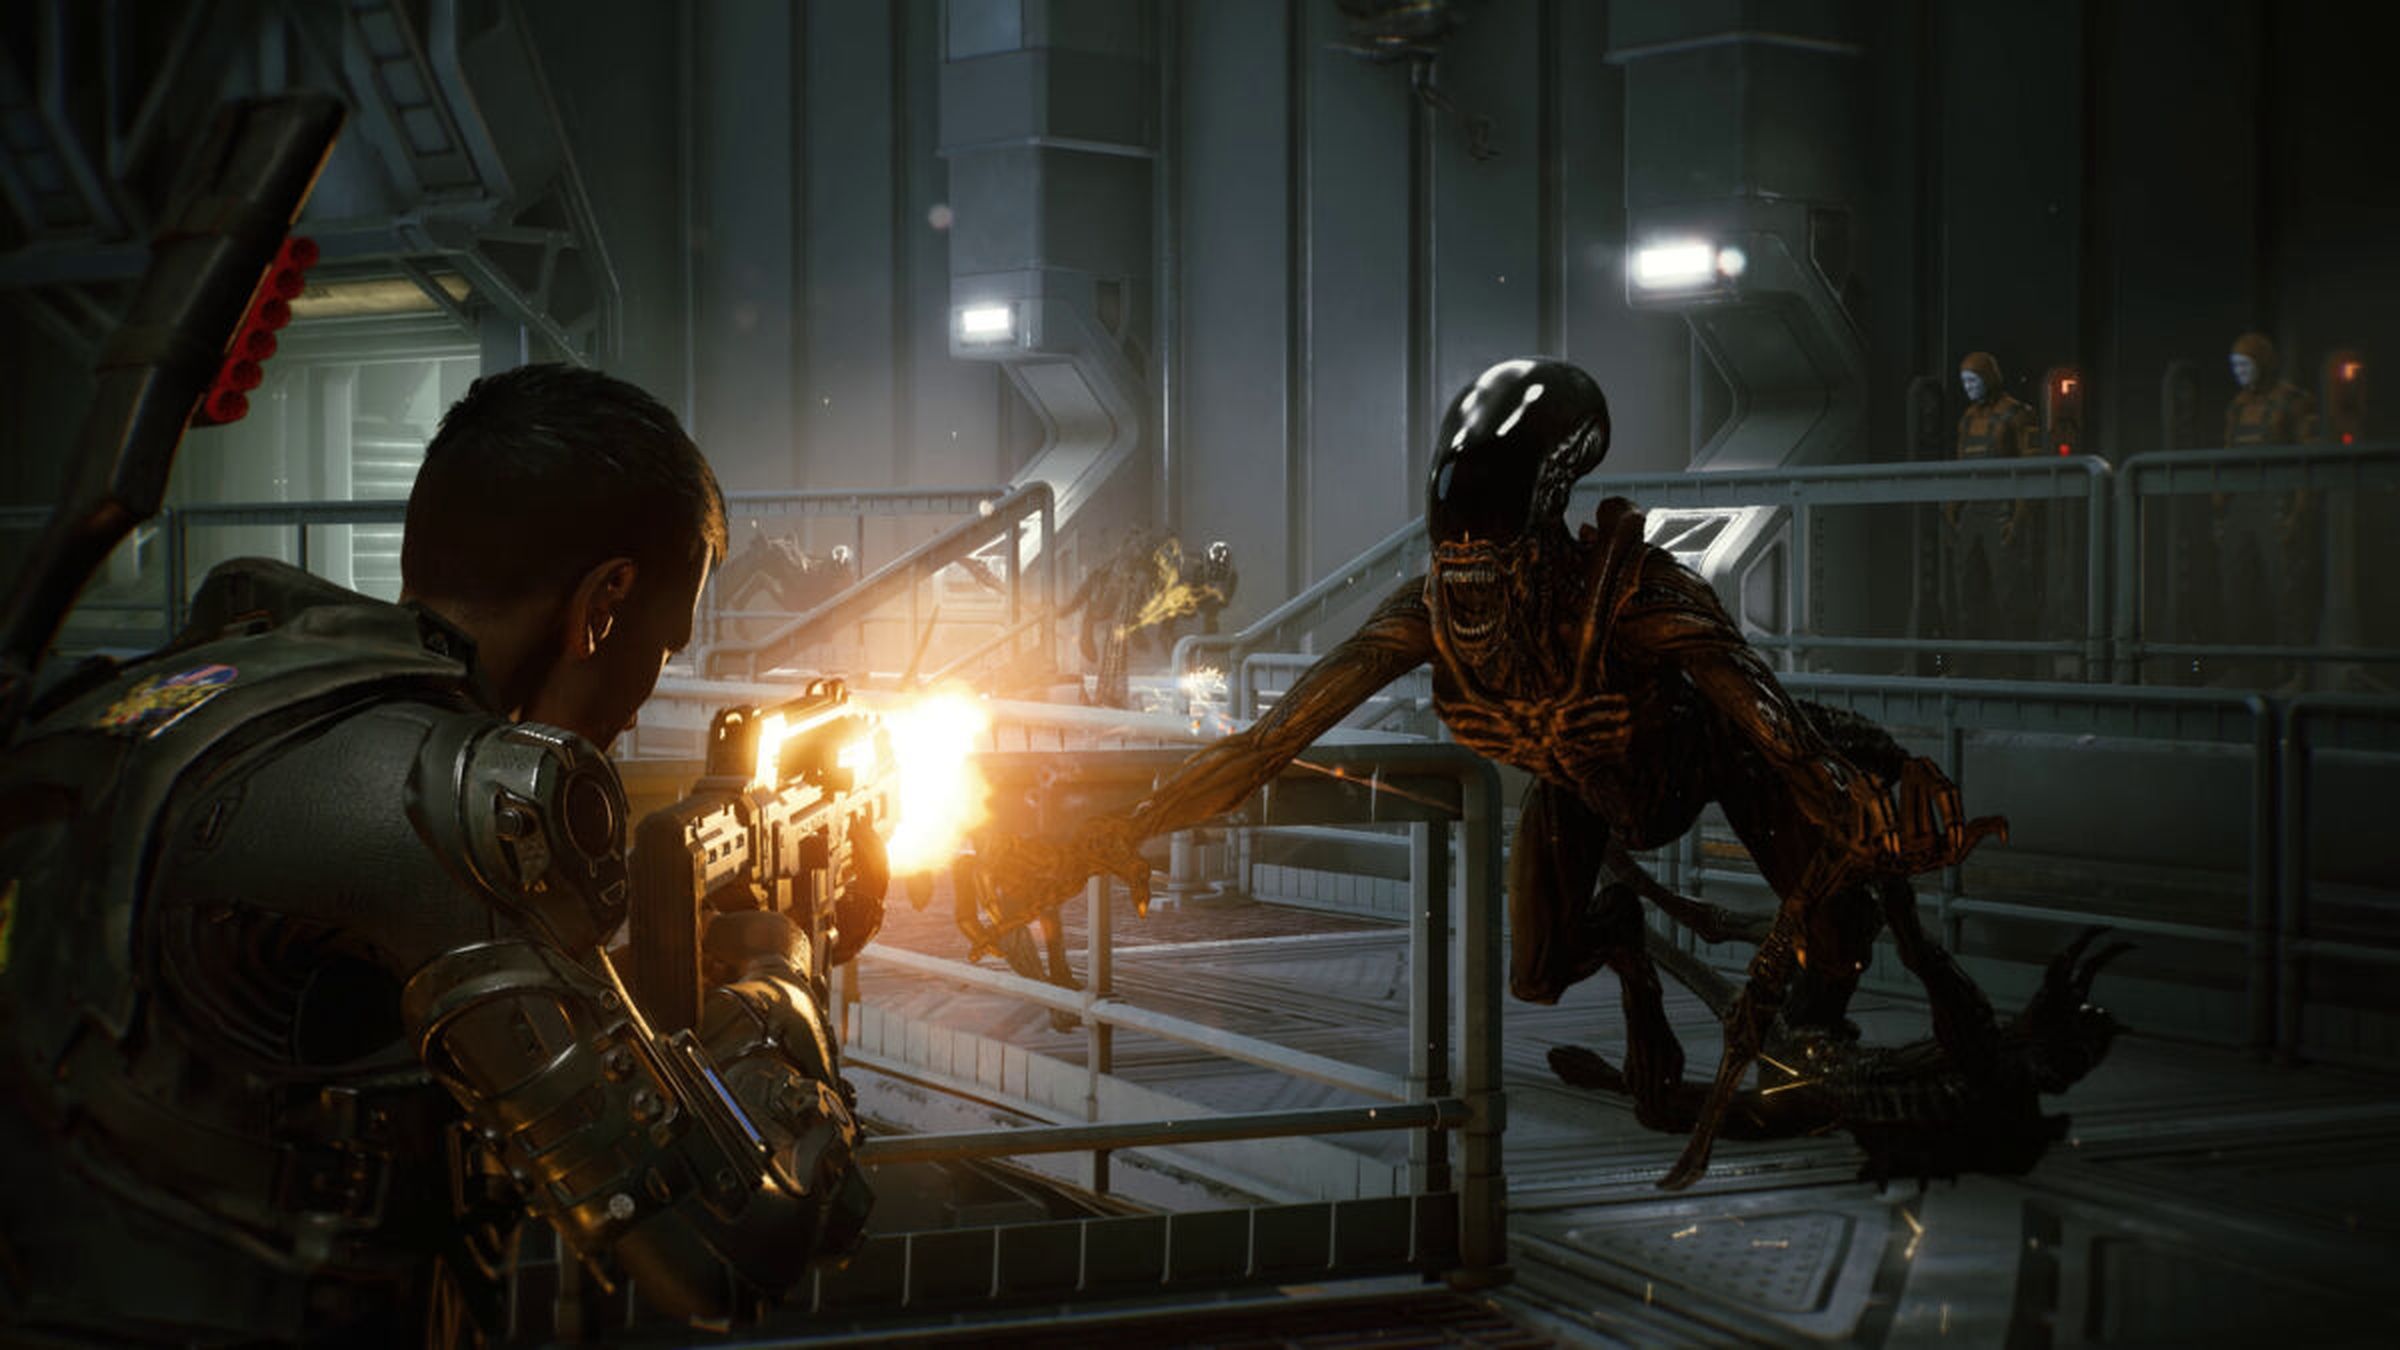 Alien: Fireteam Elite is a co-op third-person shooter pitting players against the iconic xenomorphs.